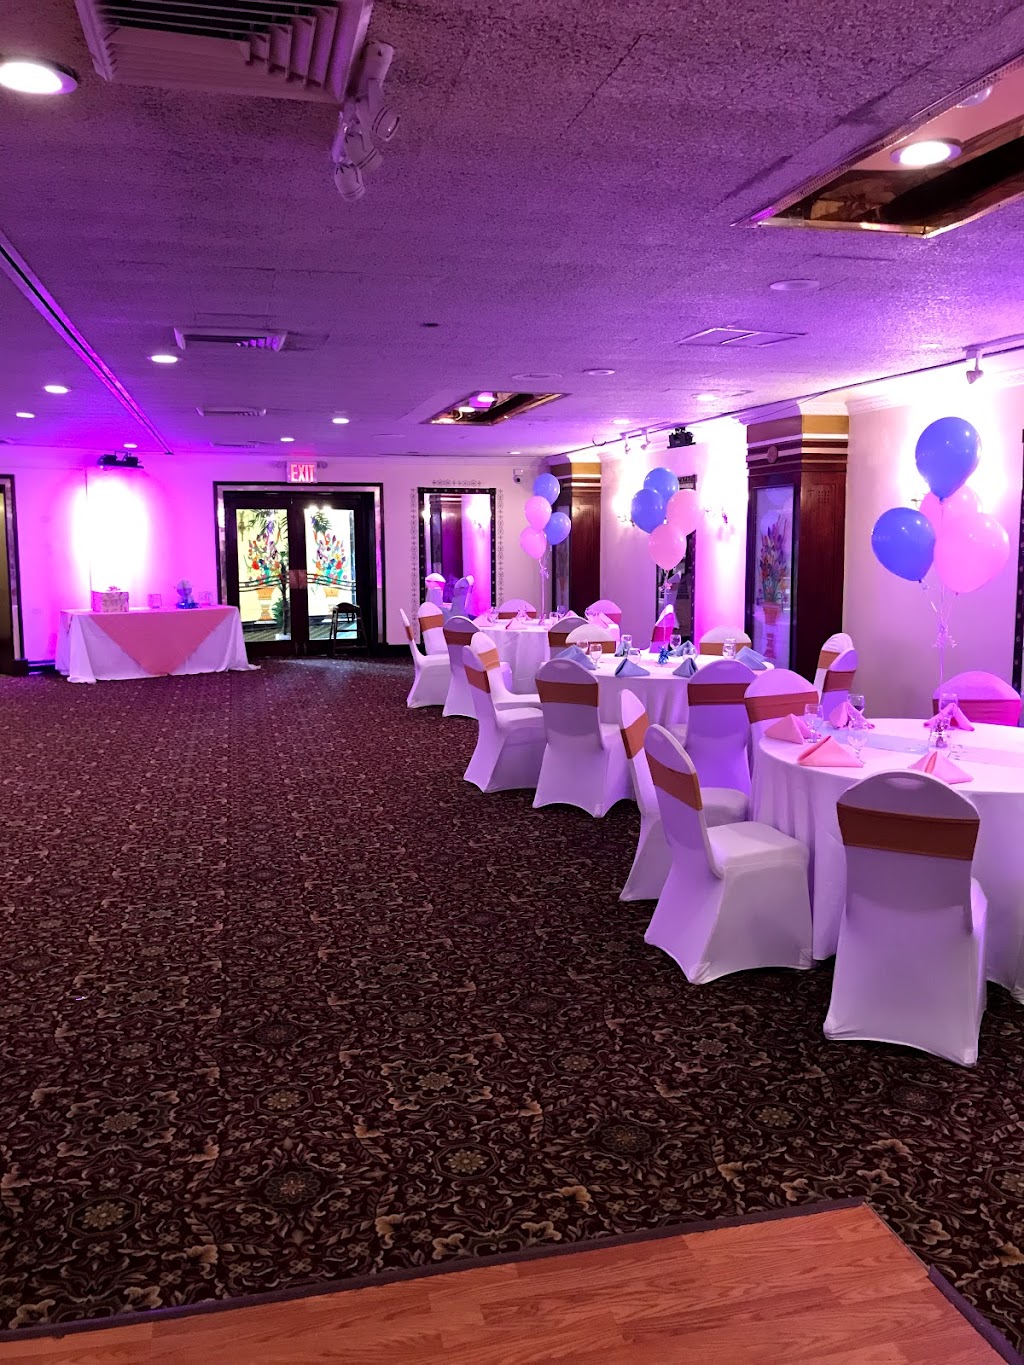 Martys Party Inc | 265 Pine Hollow Rd, Oyster Bay, NY 11771 | Phone: (516) 922-0515